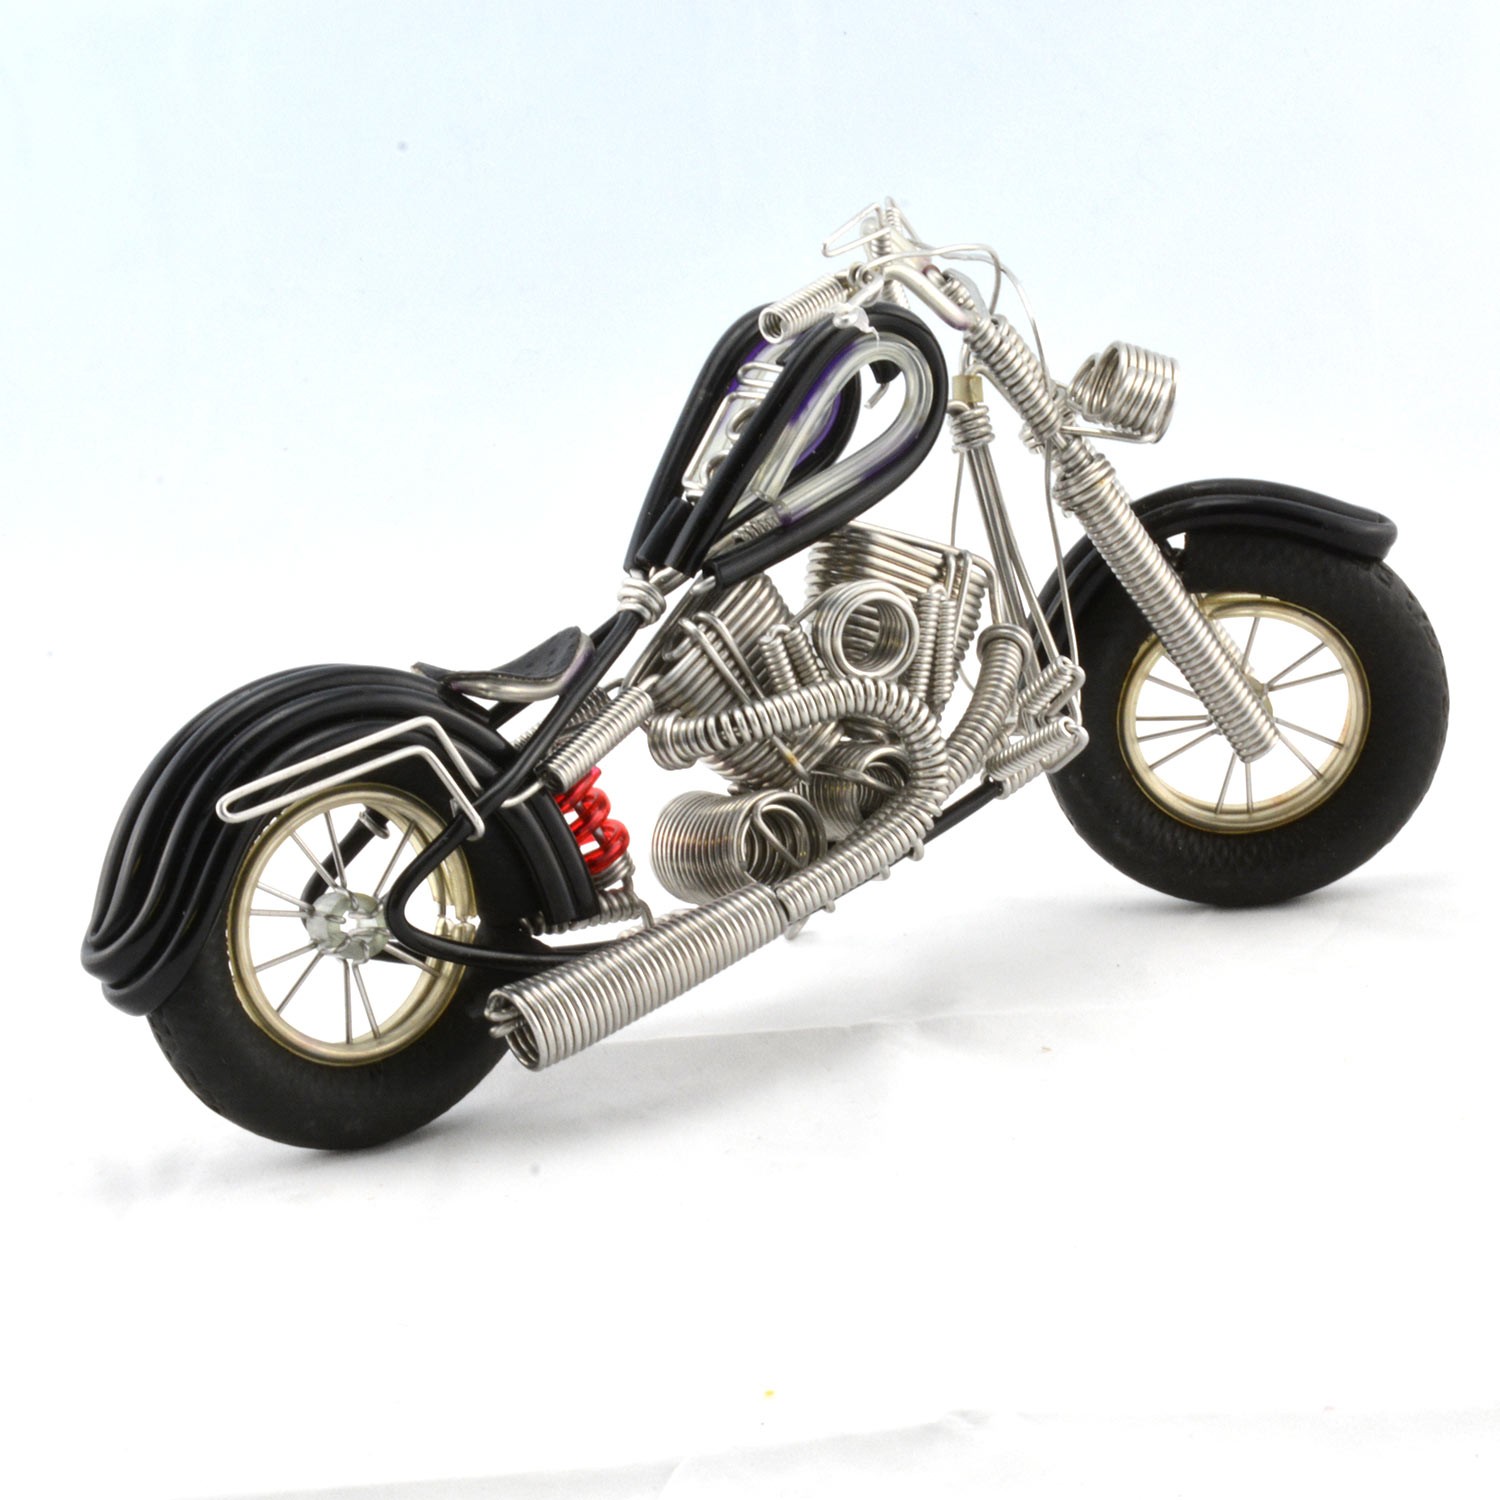 4 inch. Small Harley style bike Sculpture Motorbike handmade from wire